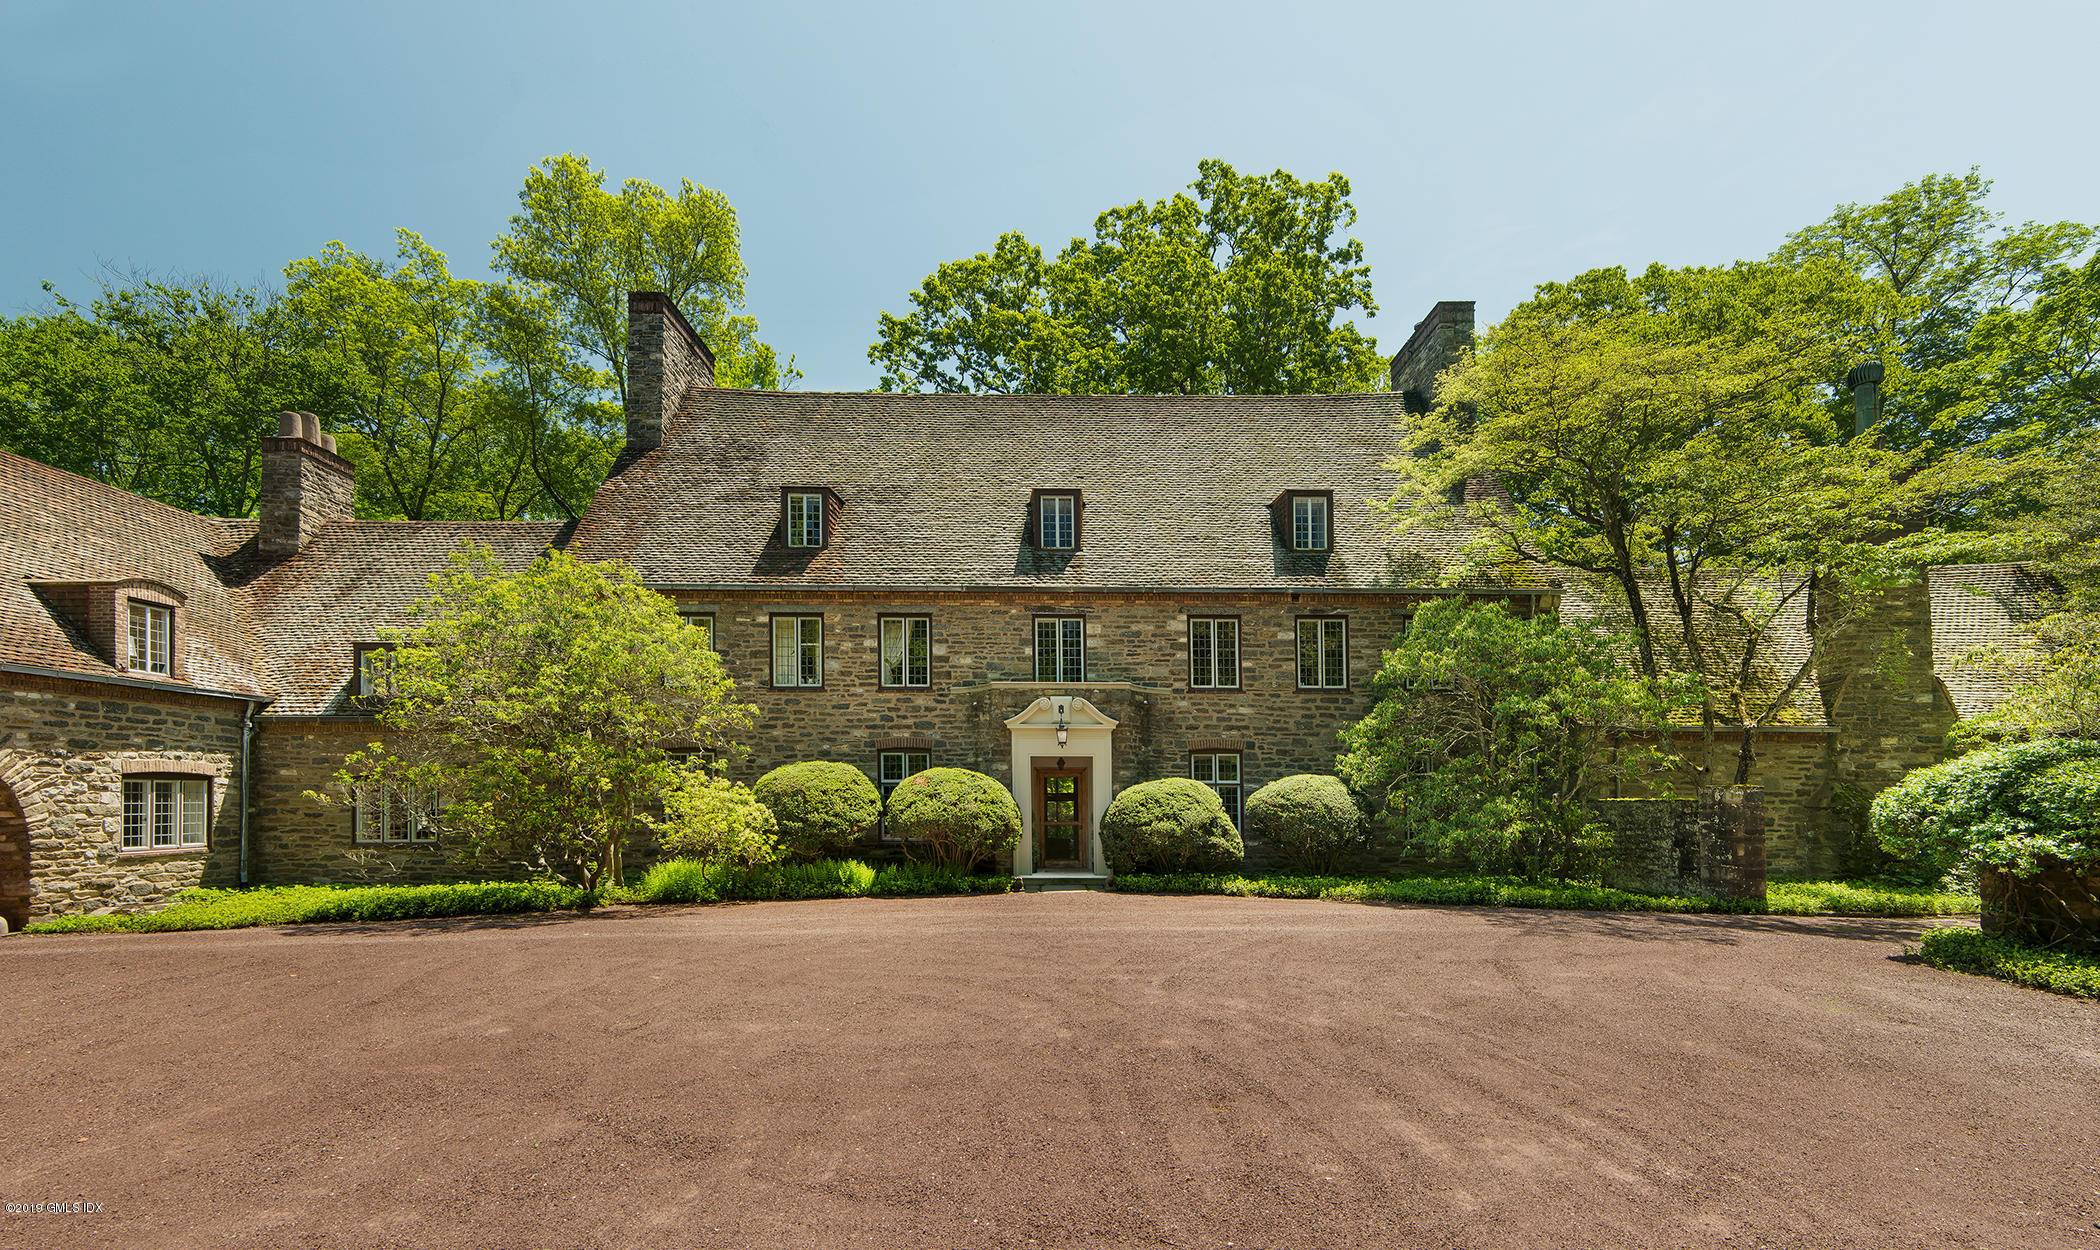 Offering a rare opportunity to own an extraordinary home fine architecture as art, designed by one of America's most revered 20th century residential architects, Harrie T.